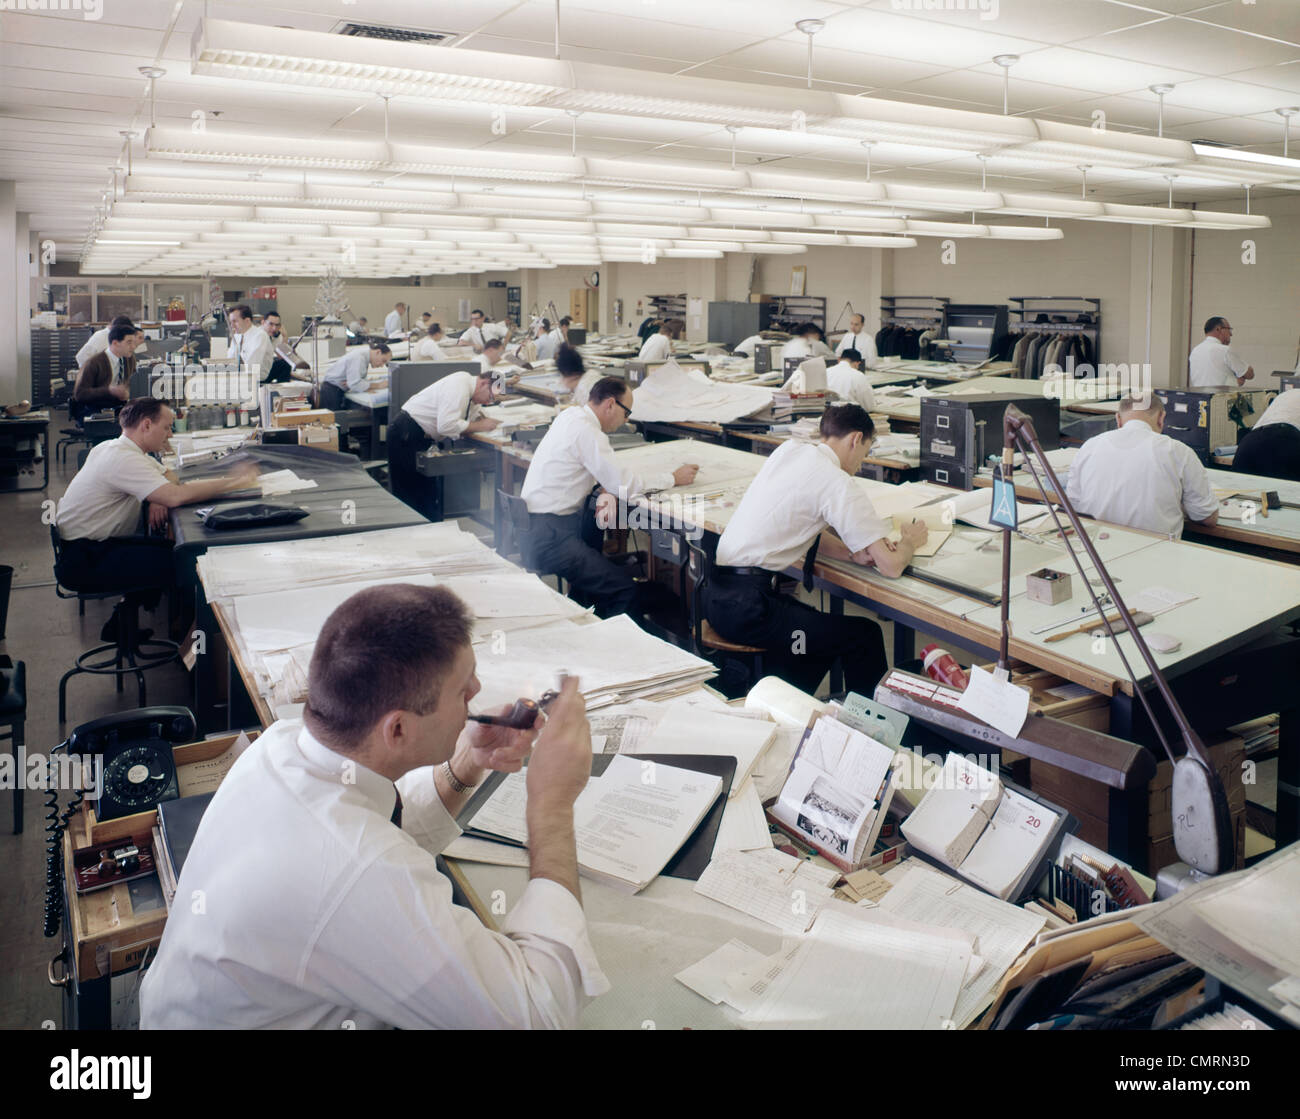 1960s OFFICE FULL OF DRAFTING TABLES DESIGNER MAN LIGHTING-UP A PIPE OF TOBACCO INDOOR INDUSTRY Stock Photo